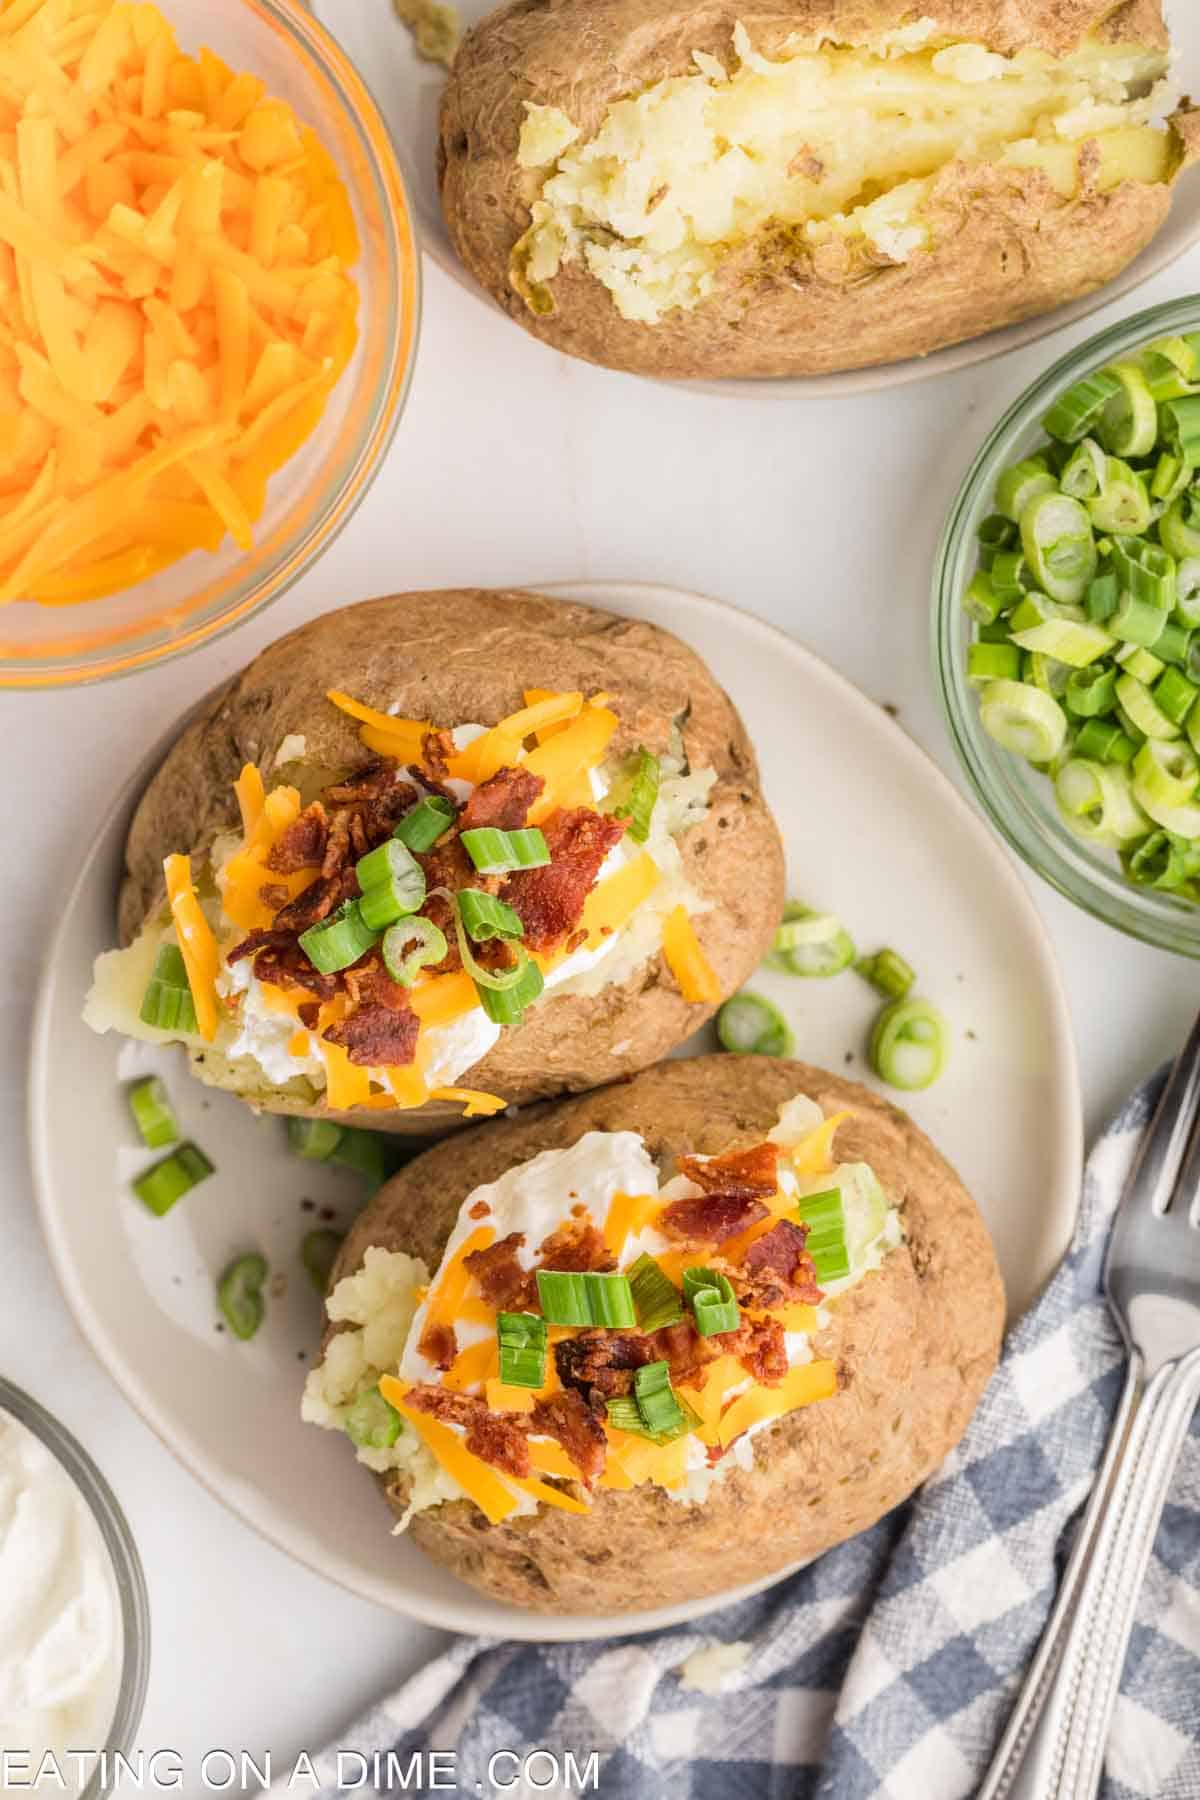 Best Microwave Baked Potato Recipe - How To A Microwave Baked Potato